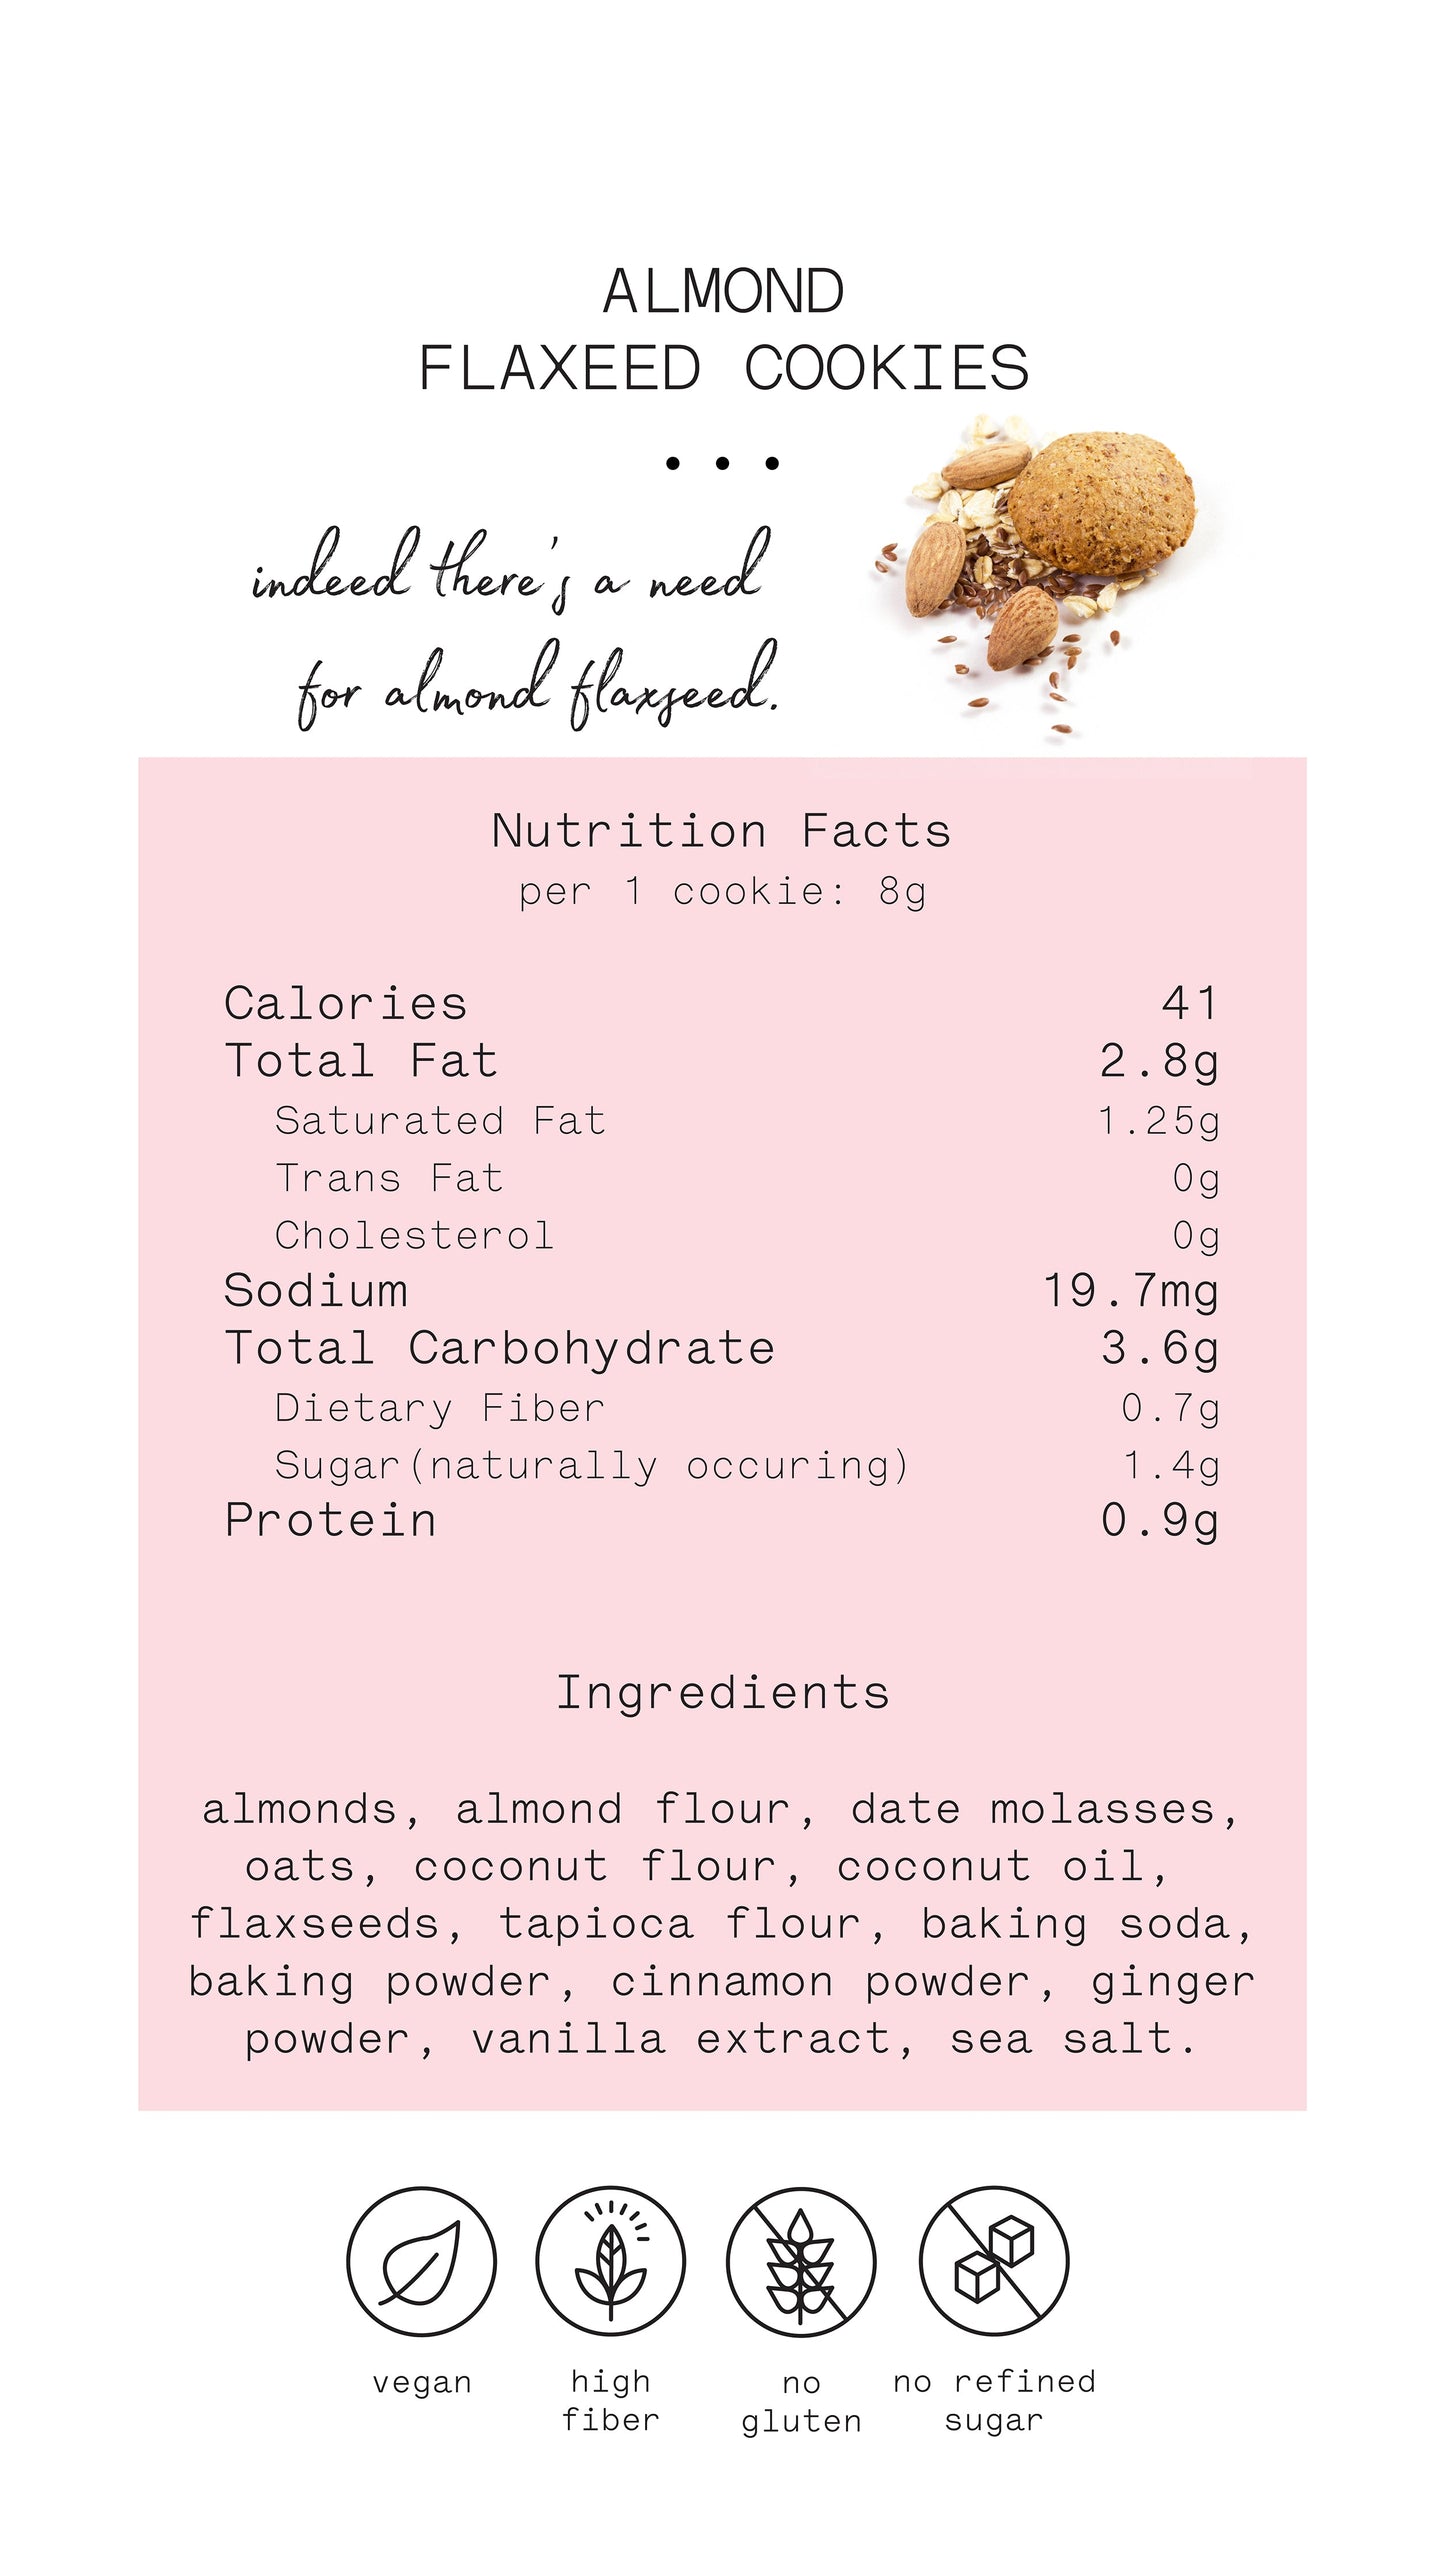 Almond Flaxseed Cookies 144g